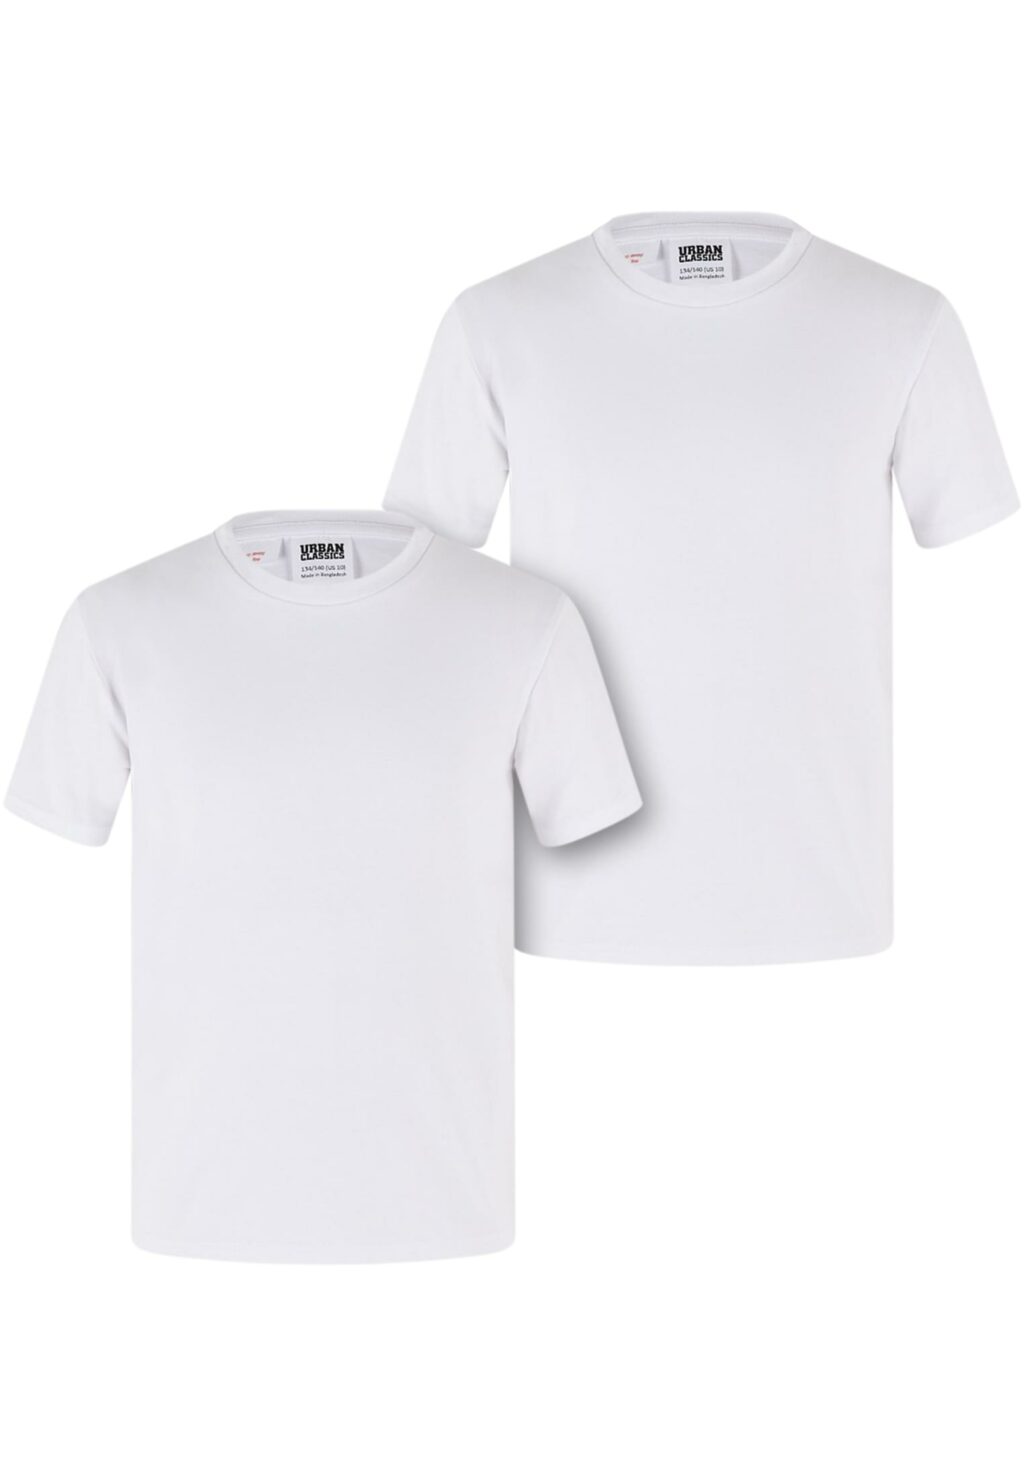 Girls Stretch Jersey Tee 2-Pack white+white UCK007A